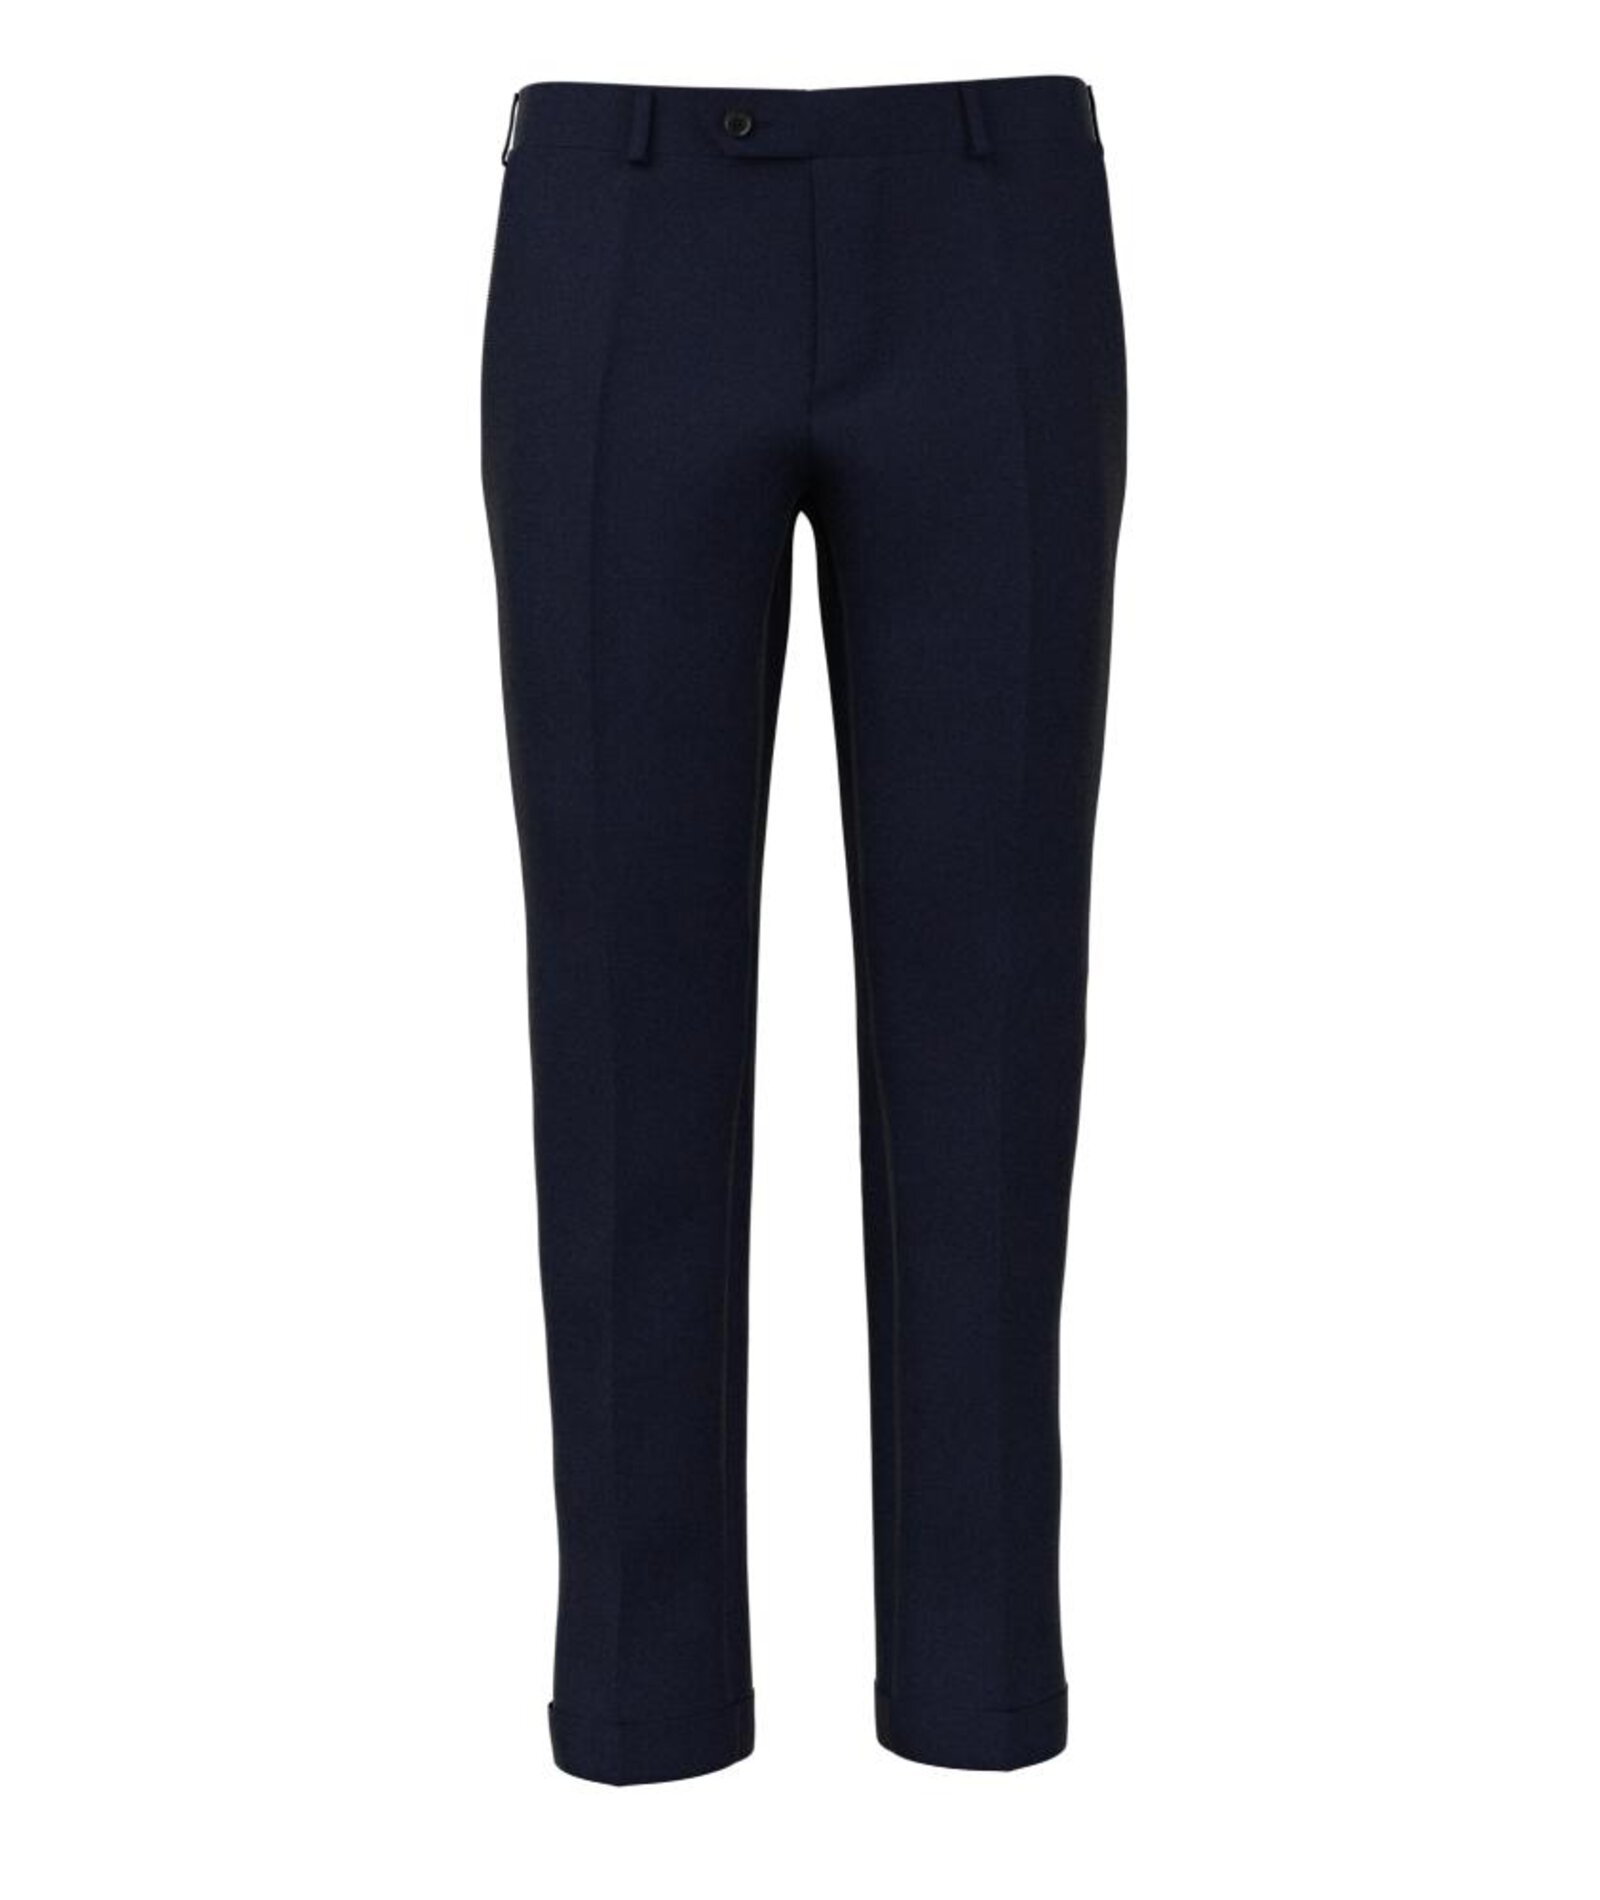 Business Blue Anti-crease Men's Custom Trousers, Made to Measure Pants ...